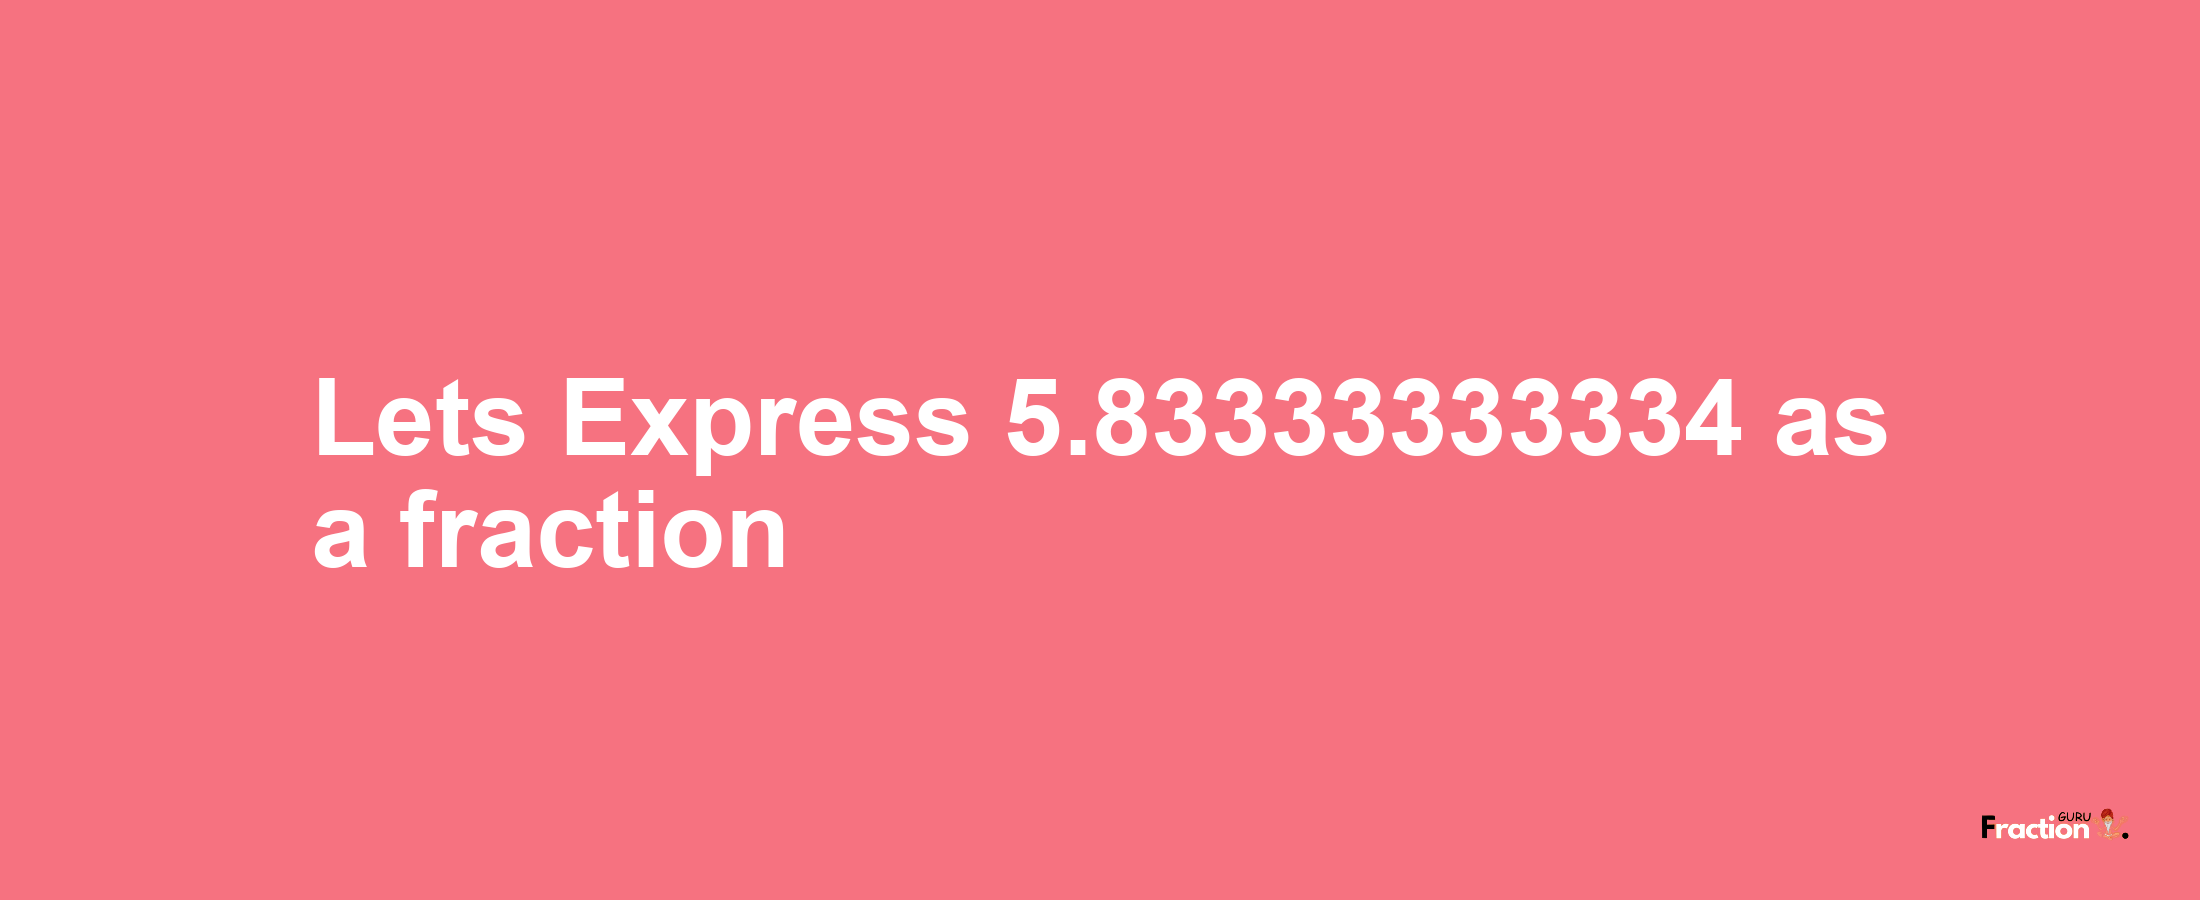 Lets Express 5.83333333334 as afraction